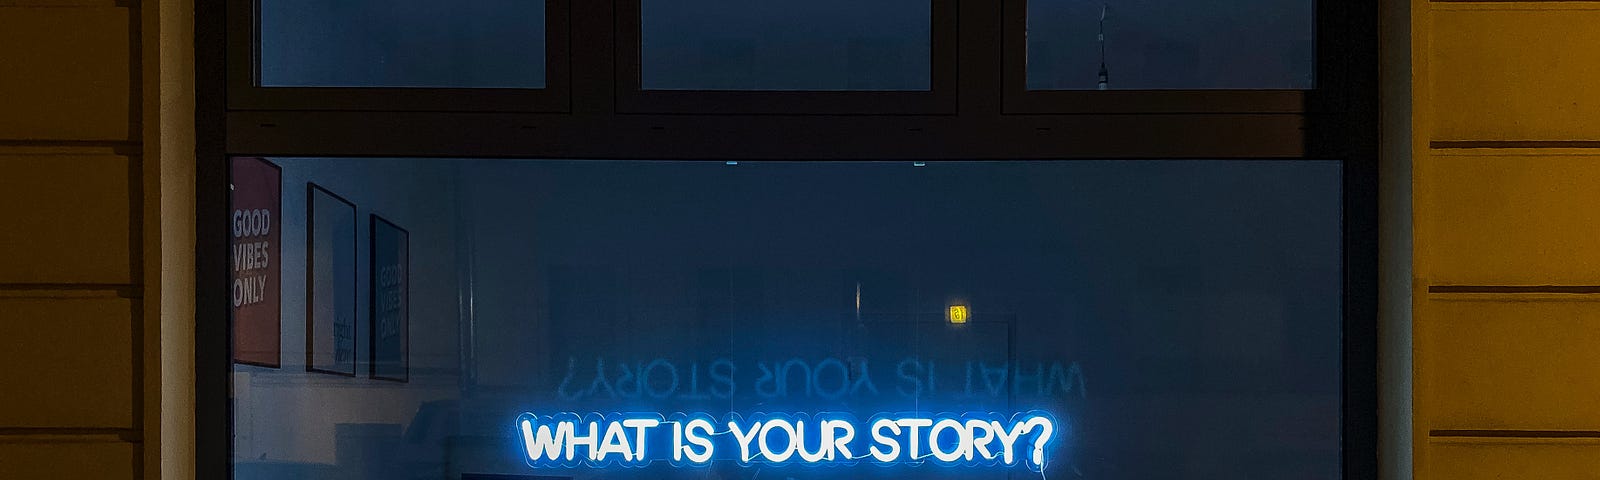 Close up of a dark window with a dimly lit bedroom visible behind it. The words “WHAT IS YOUR STORY?” are lit up neon on the glass.